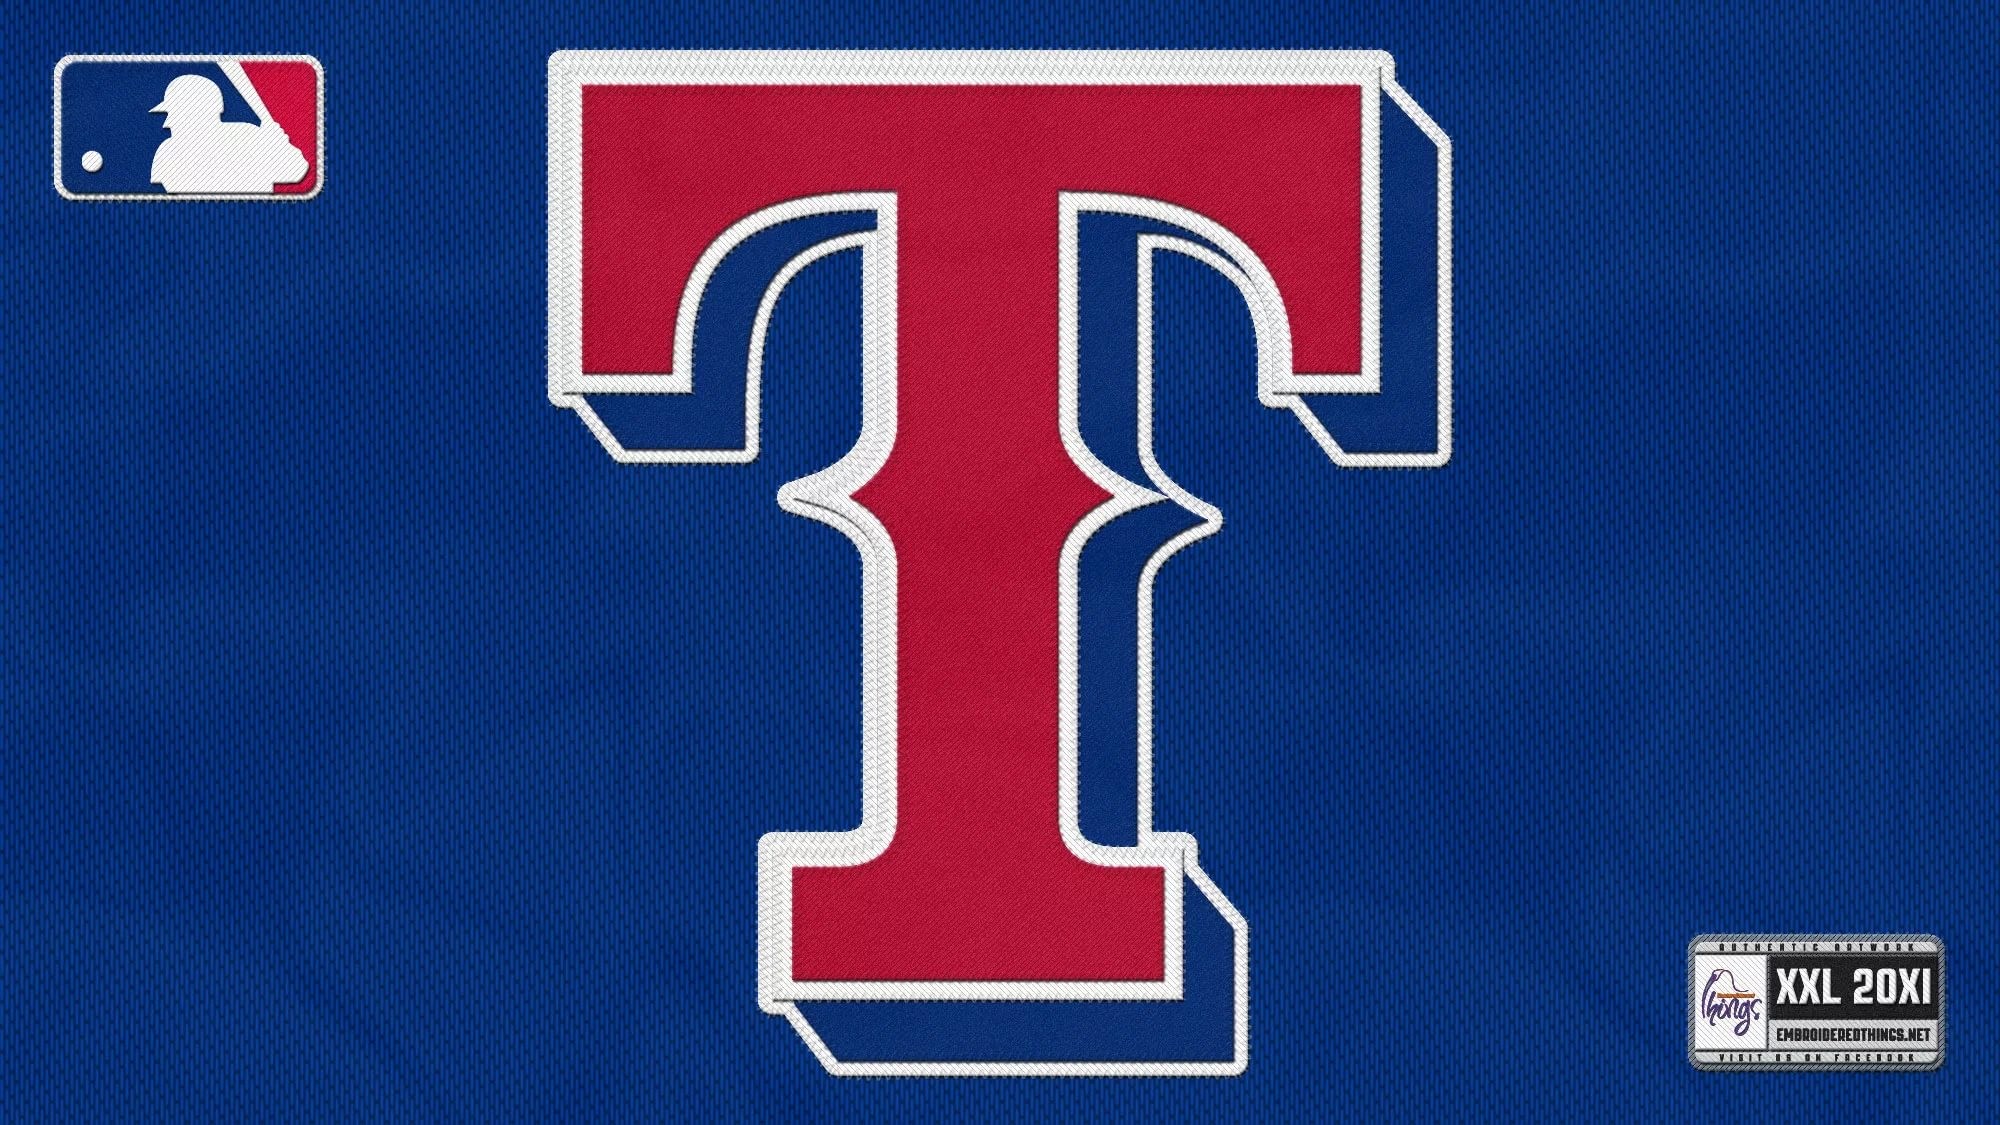 2000x1125 Best images of Texas Rangers Images of Texas Rangers ...